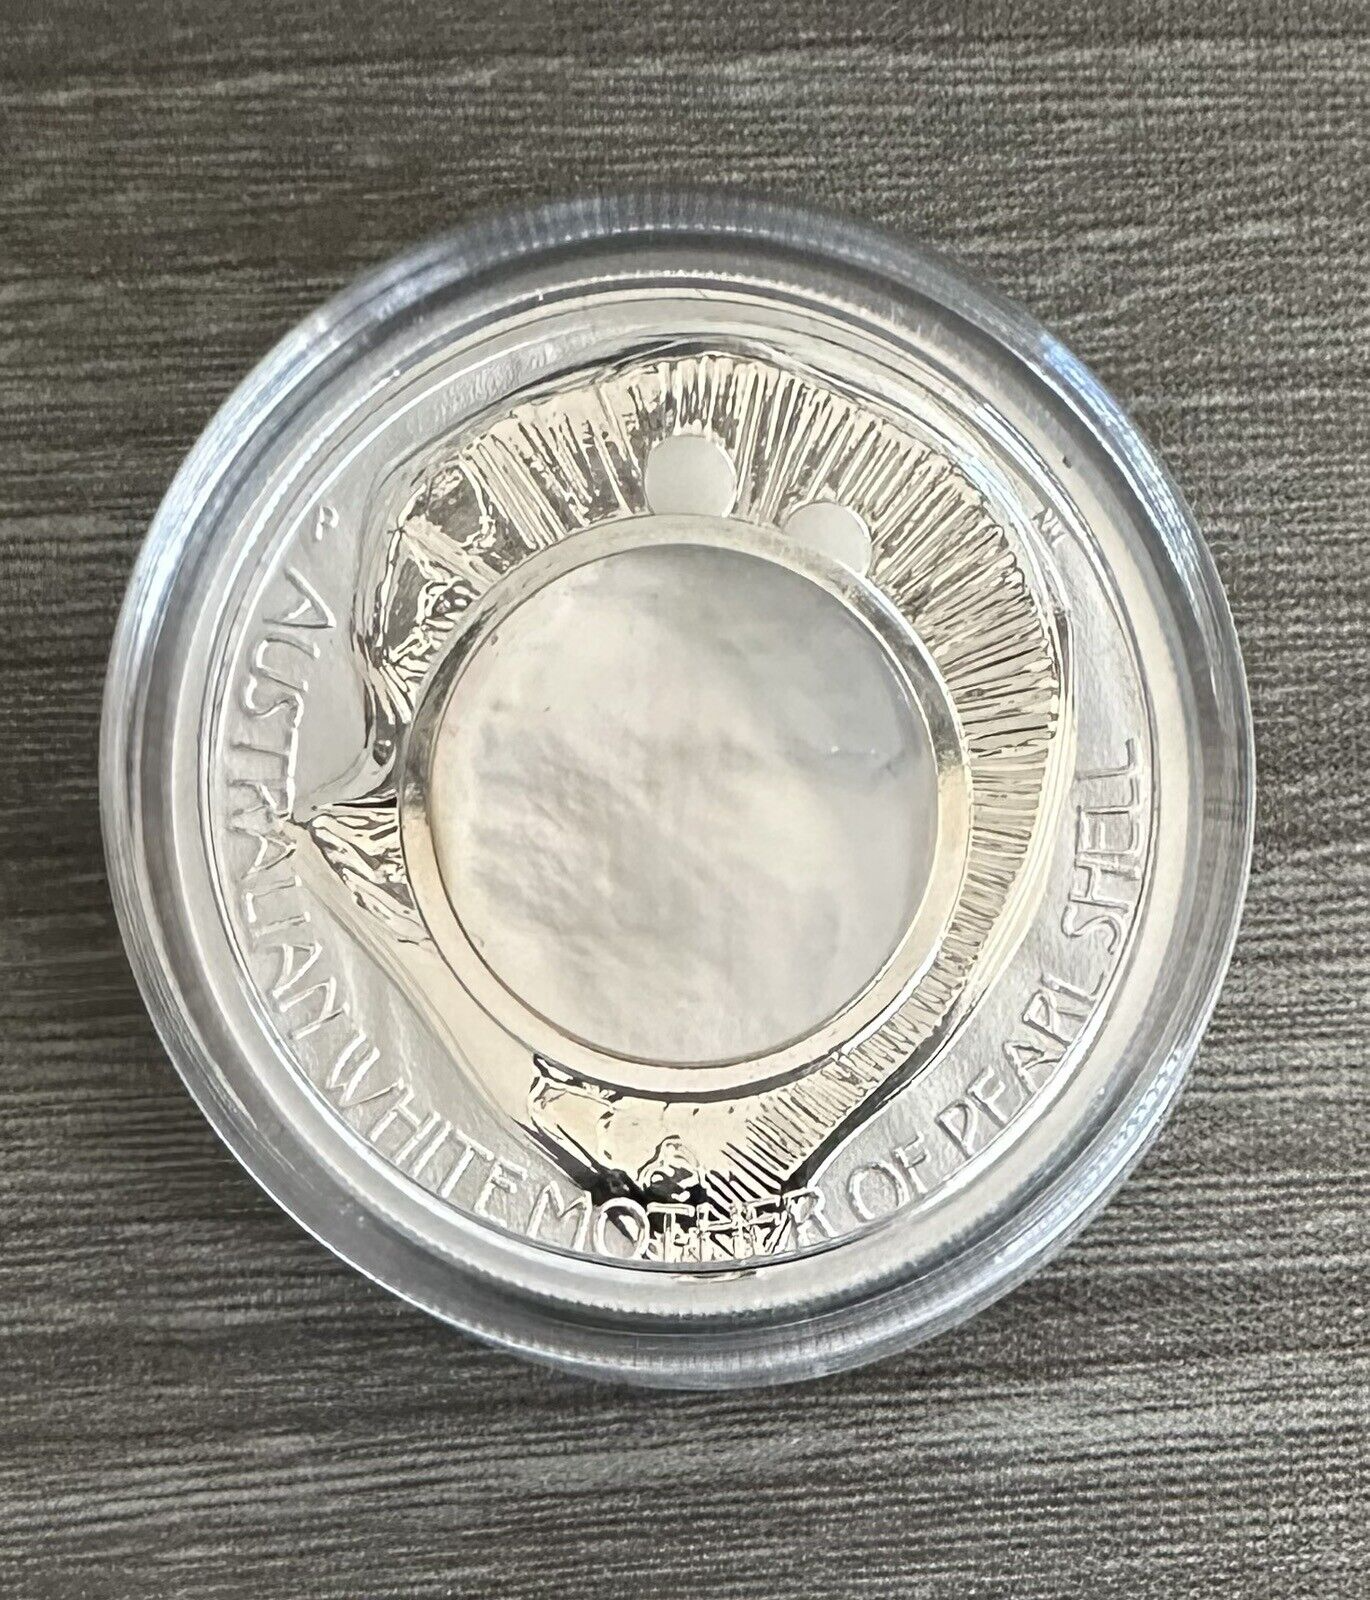 1 Oz Silver Coin 2015 $1 Australia Australian Mother of Pearl Shell Proof Coin-classypw.com-4